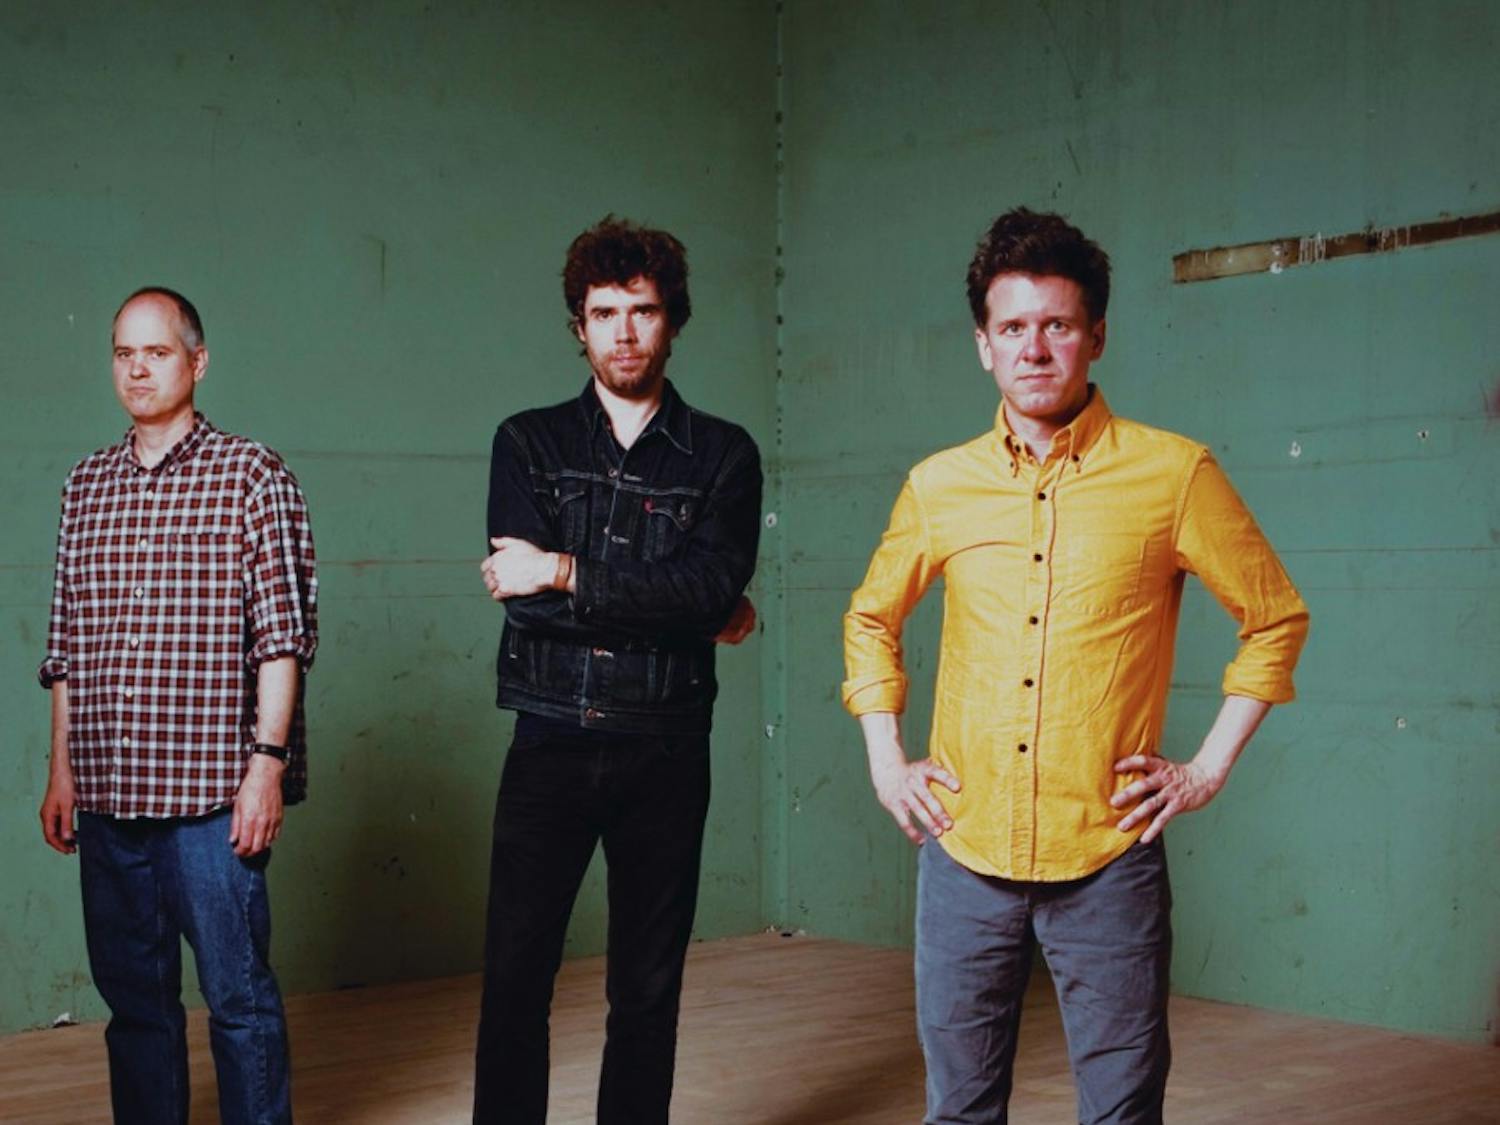 	Mac McCaughan (right) poses with bandmates Jon Wurster and Jim Wilbur. He co-founded Merge Records, which is located in Durham, with fellow Superchunk member Laura Ballance (not pictured) in the late 1980’s. Coutesy of merge records/jason arthurs